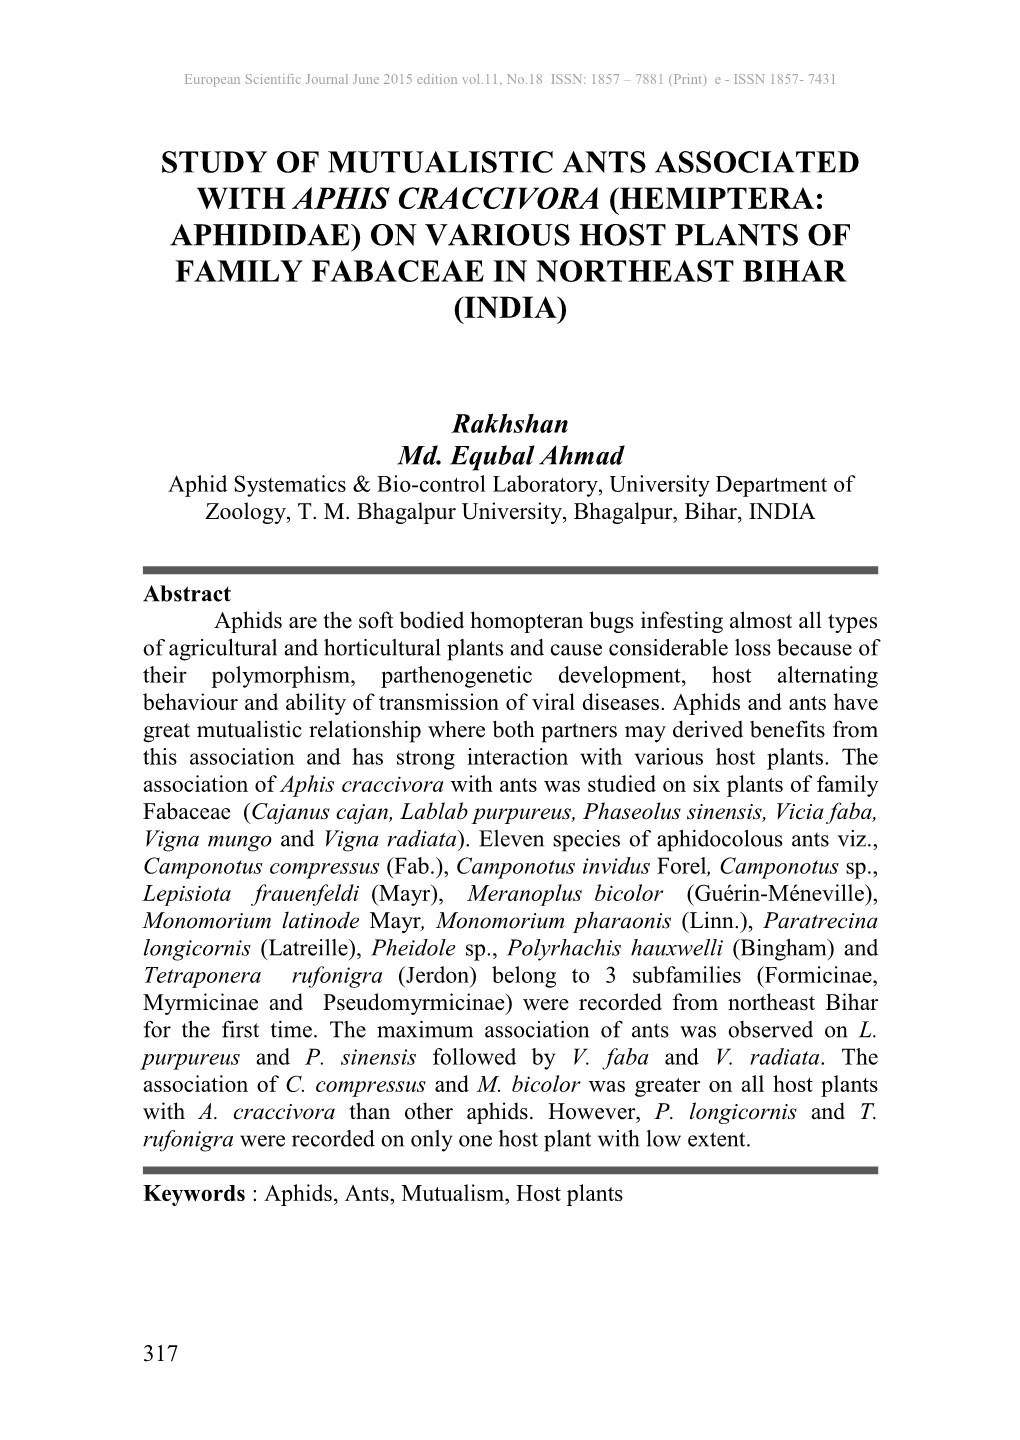 Study of Mutualistic Ants Associated with Aphis Craccivora (Hemiptera: Aphididae) on Various Host Plants of Family Fabaceae in Northeast Bihar (India)